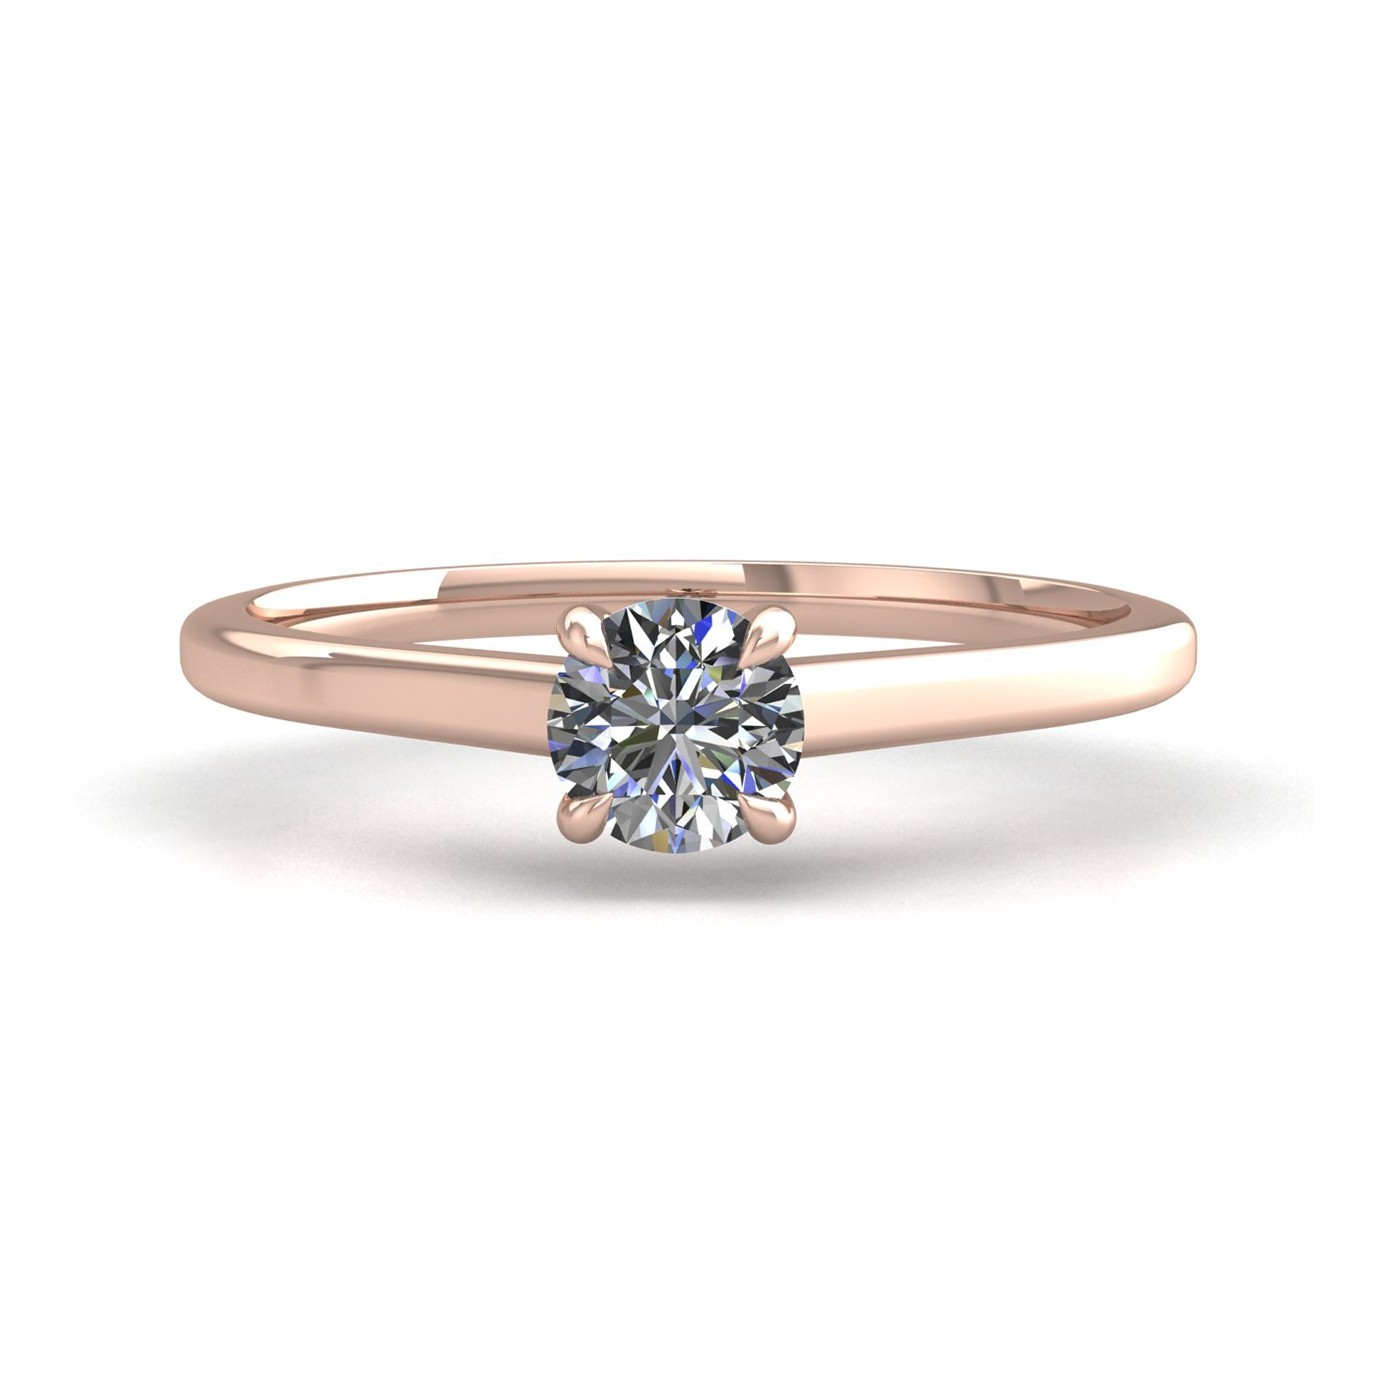 18k rose gold 2.5 ct 4 prongs solitaire round cut diamond engagement ring with whisper thin band Photos & images